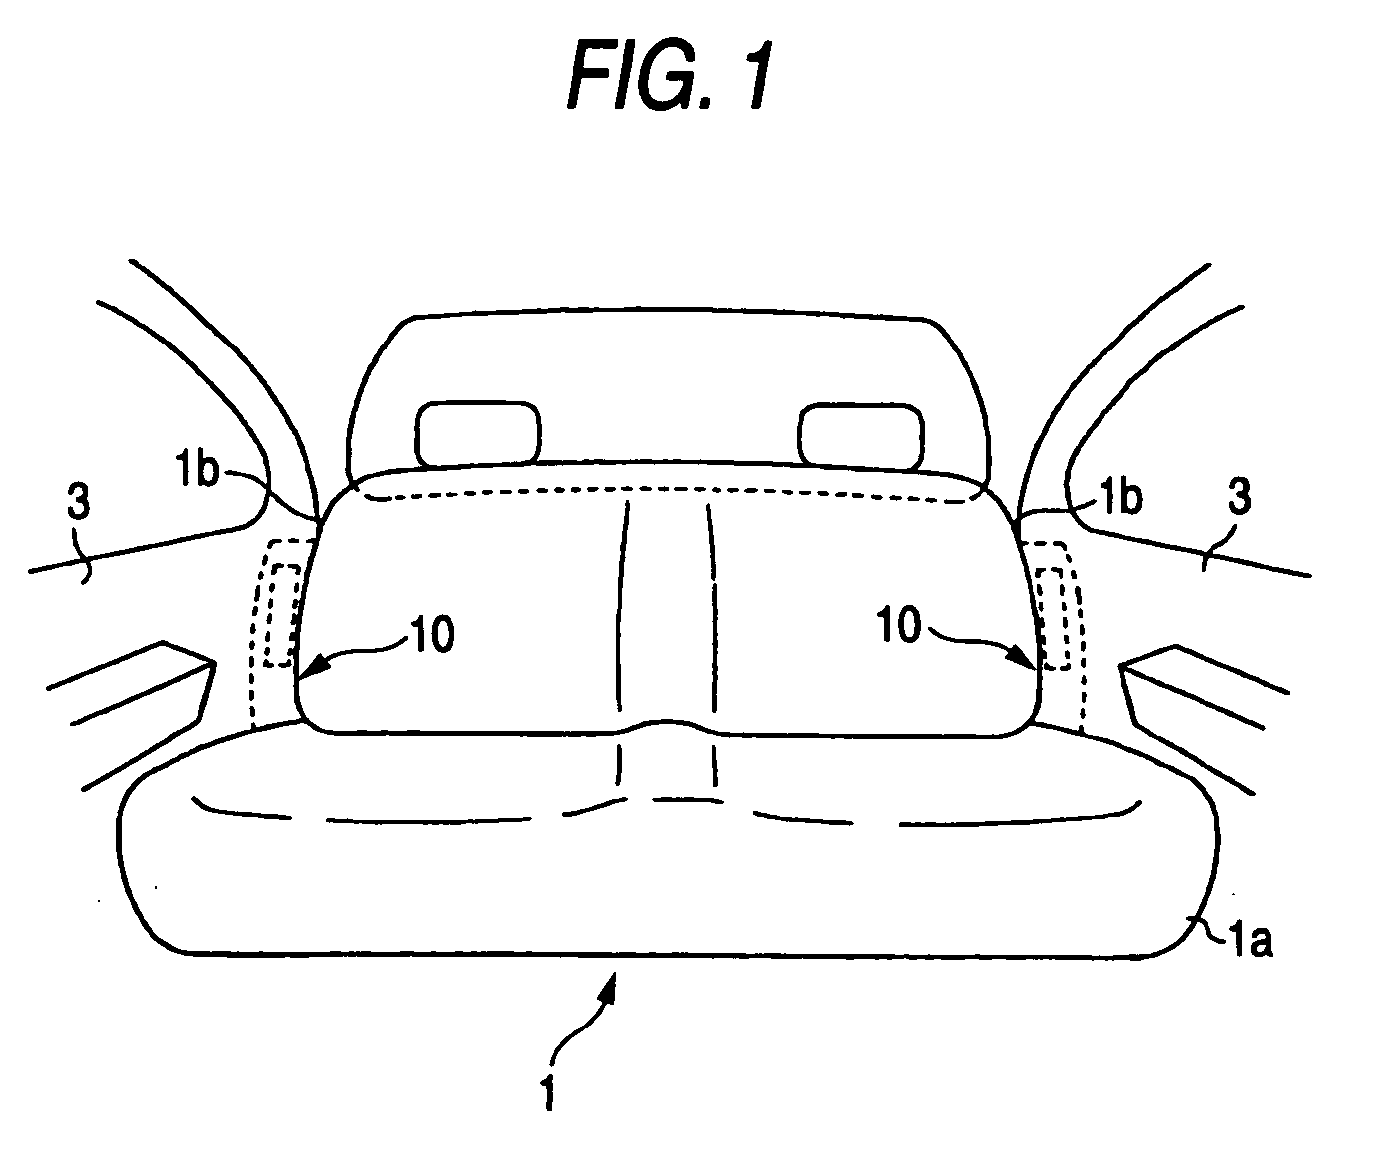 Rear seat side airbag device